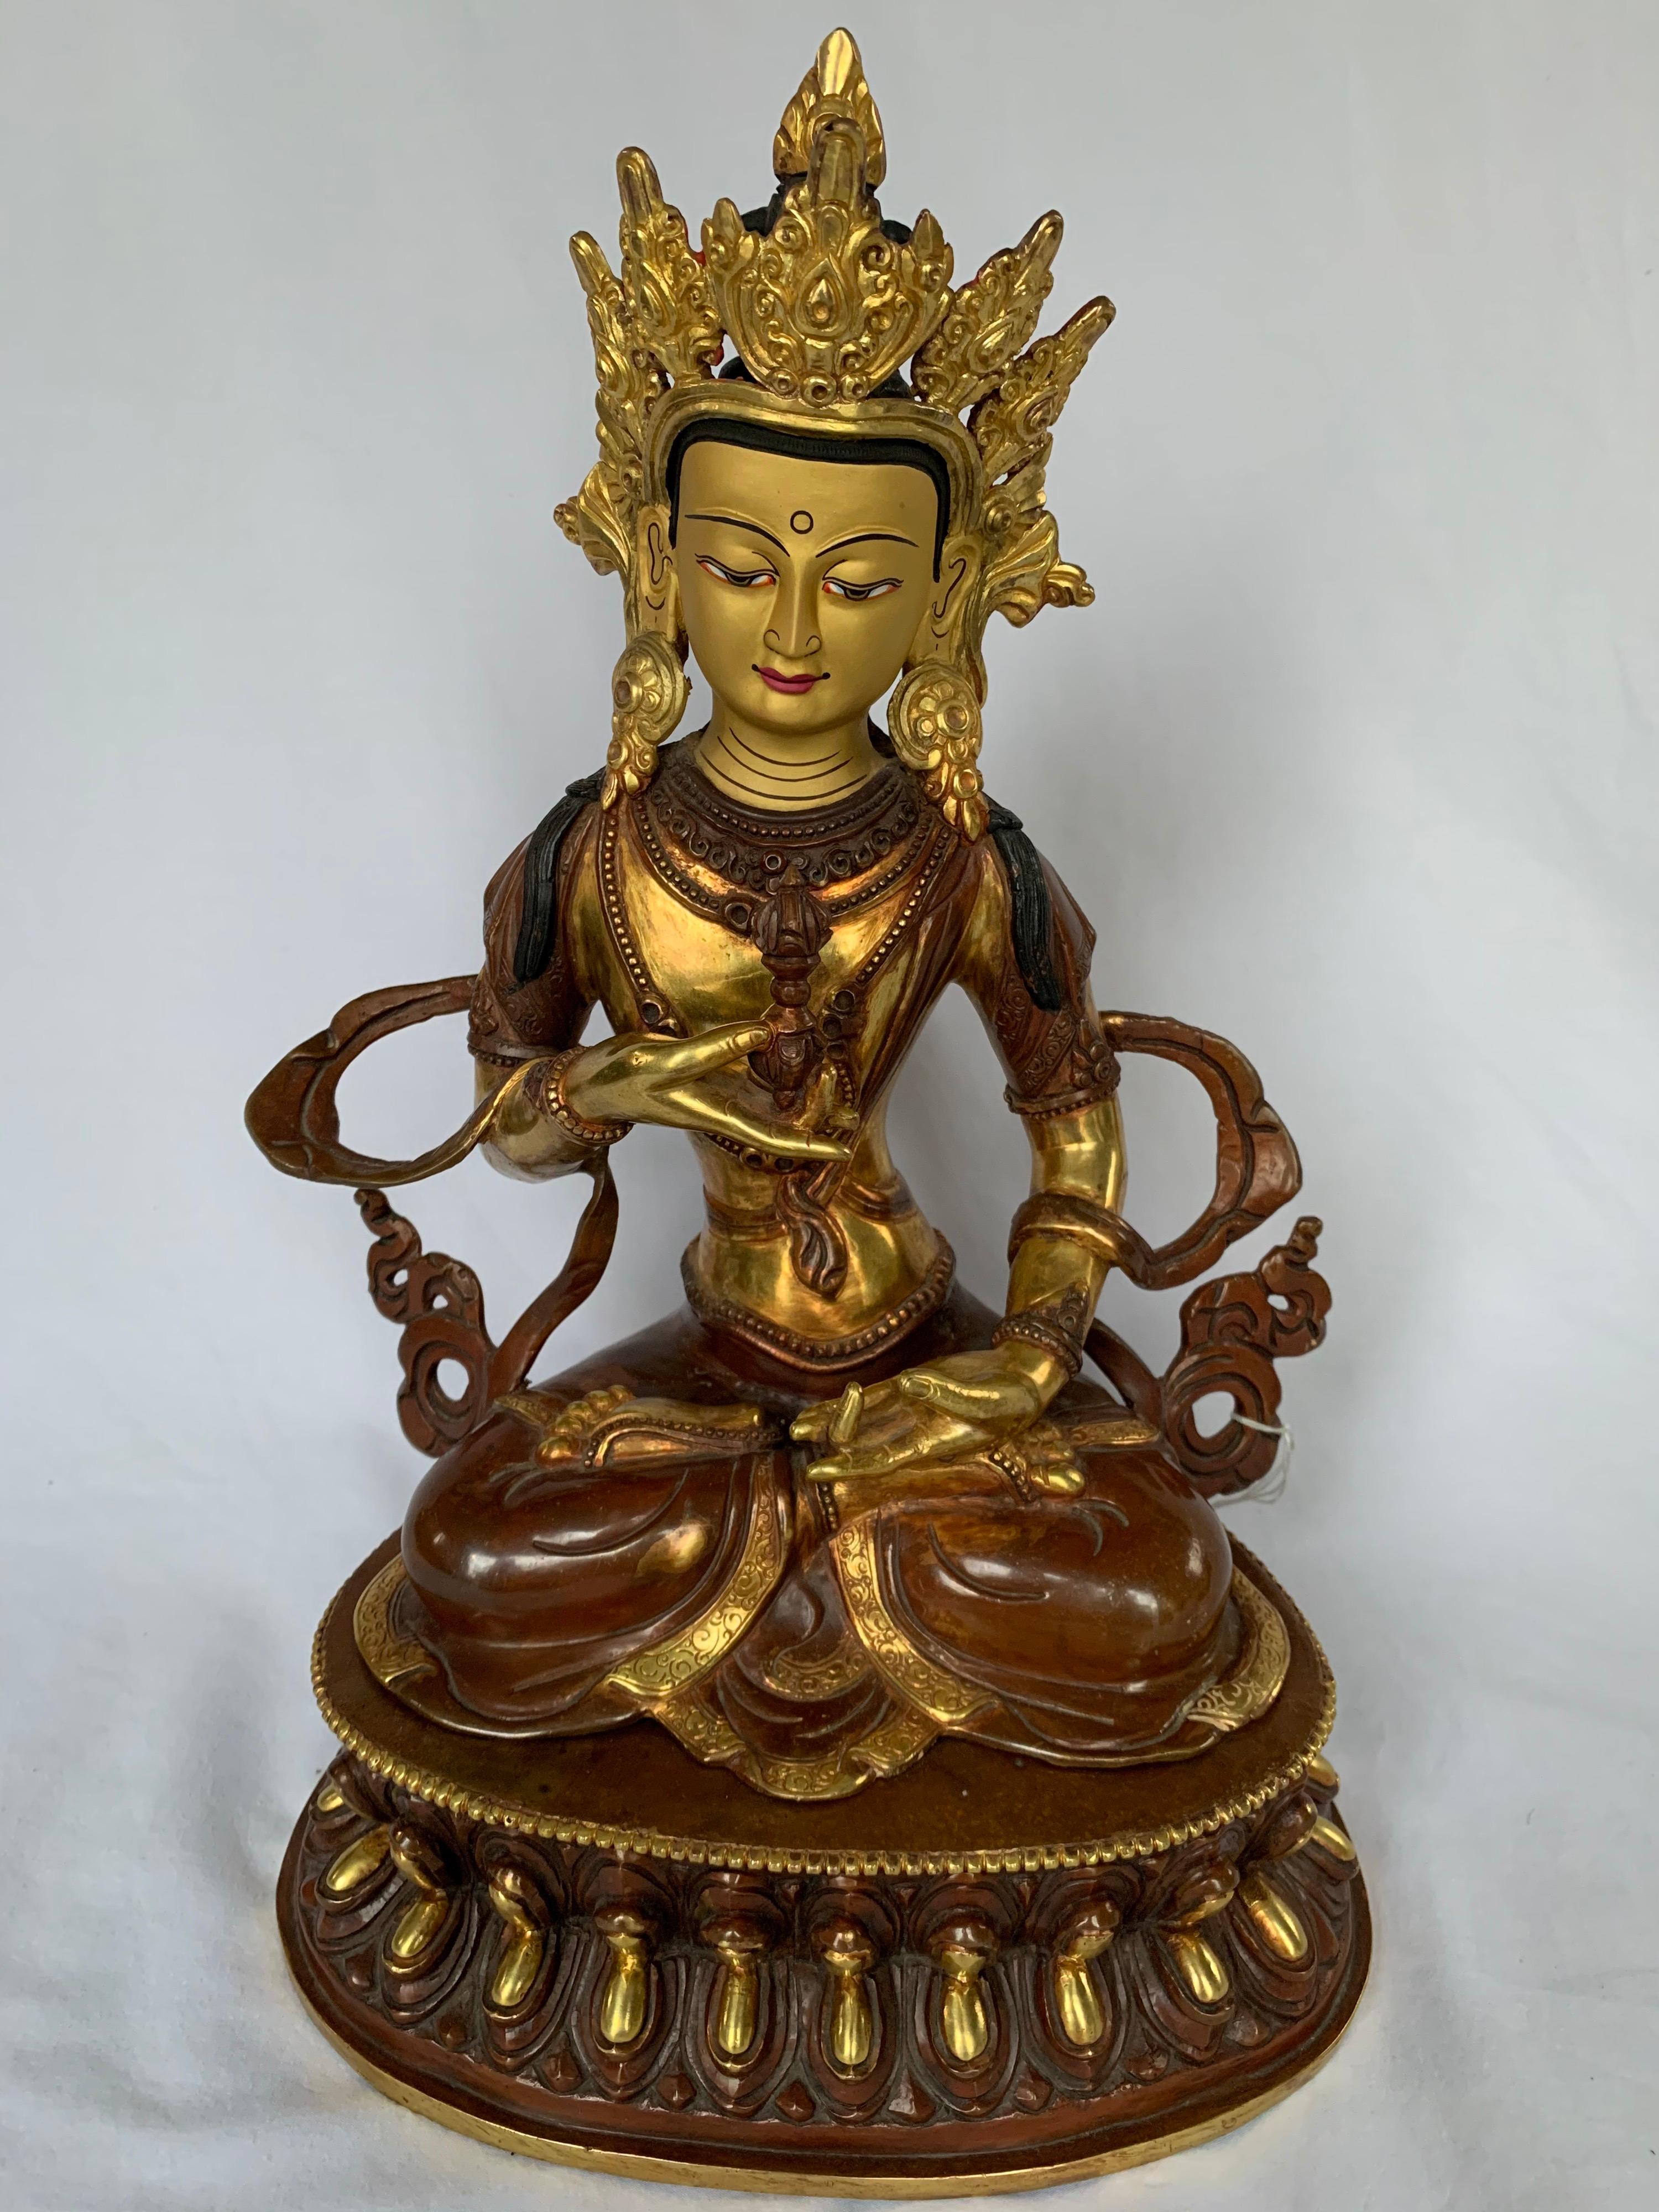 Unknown Figurative Sculpture - Vajrasattva Statue 12.5 Inch with 24K Gold Handcrafted by Lost Wax Process